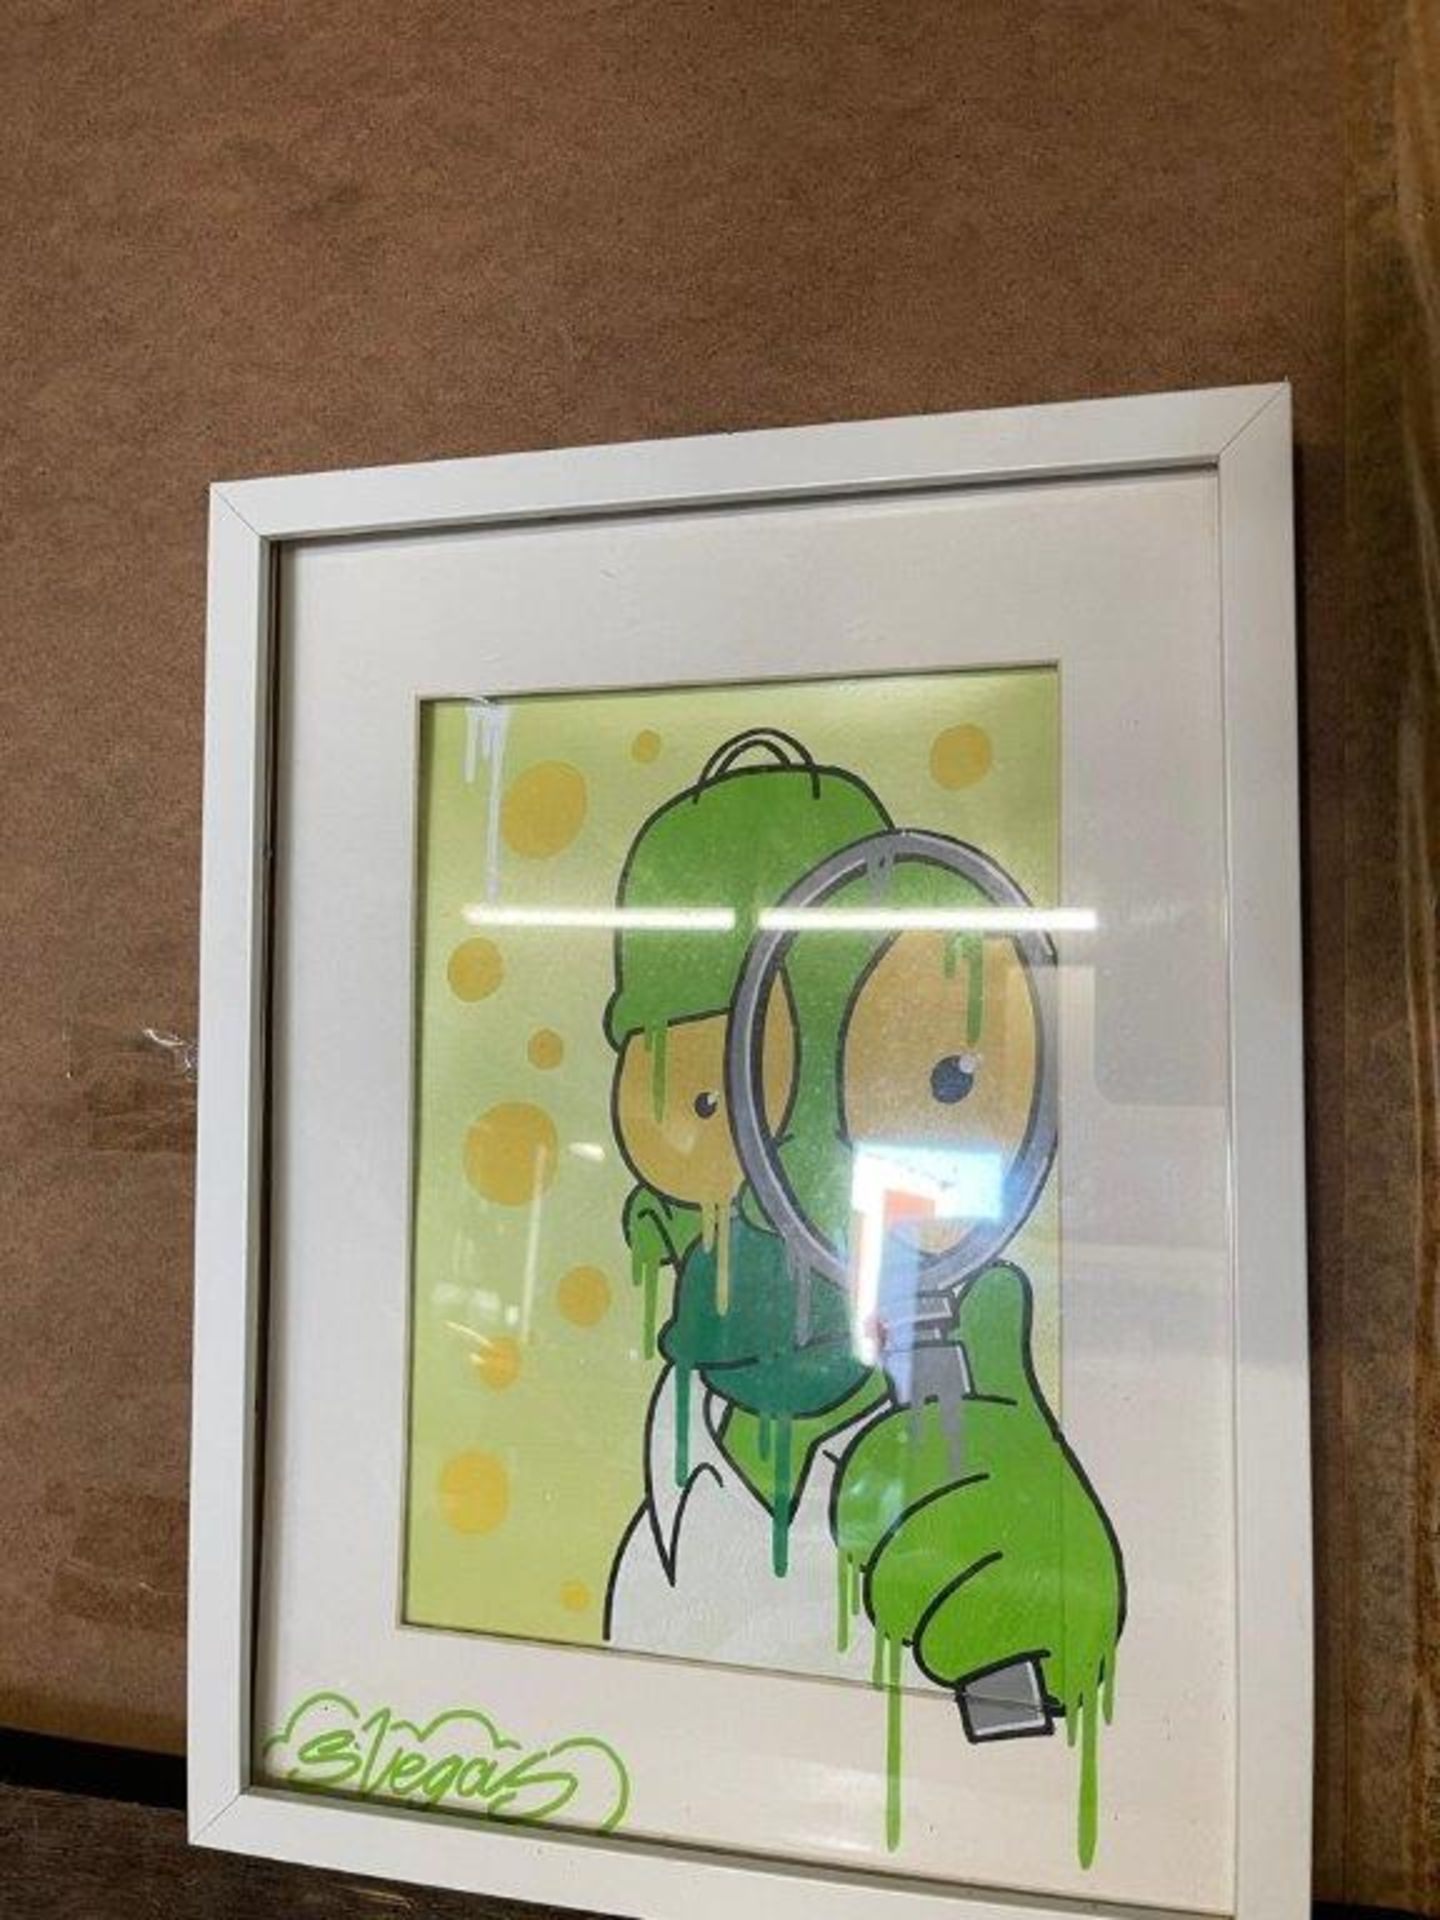 GREEN HOMER SIMPSON WITH LOOKING GLASS GRAFITTI STYLE ARTWORK BY S VEGAS IN FRAME **COLLECTION